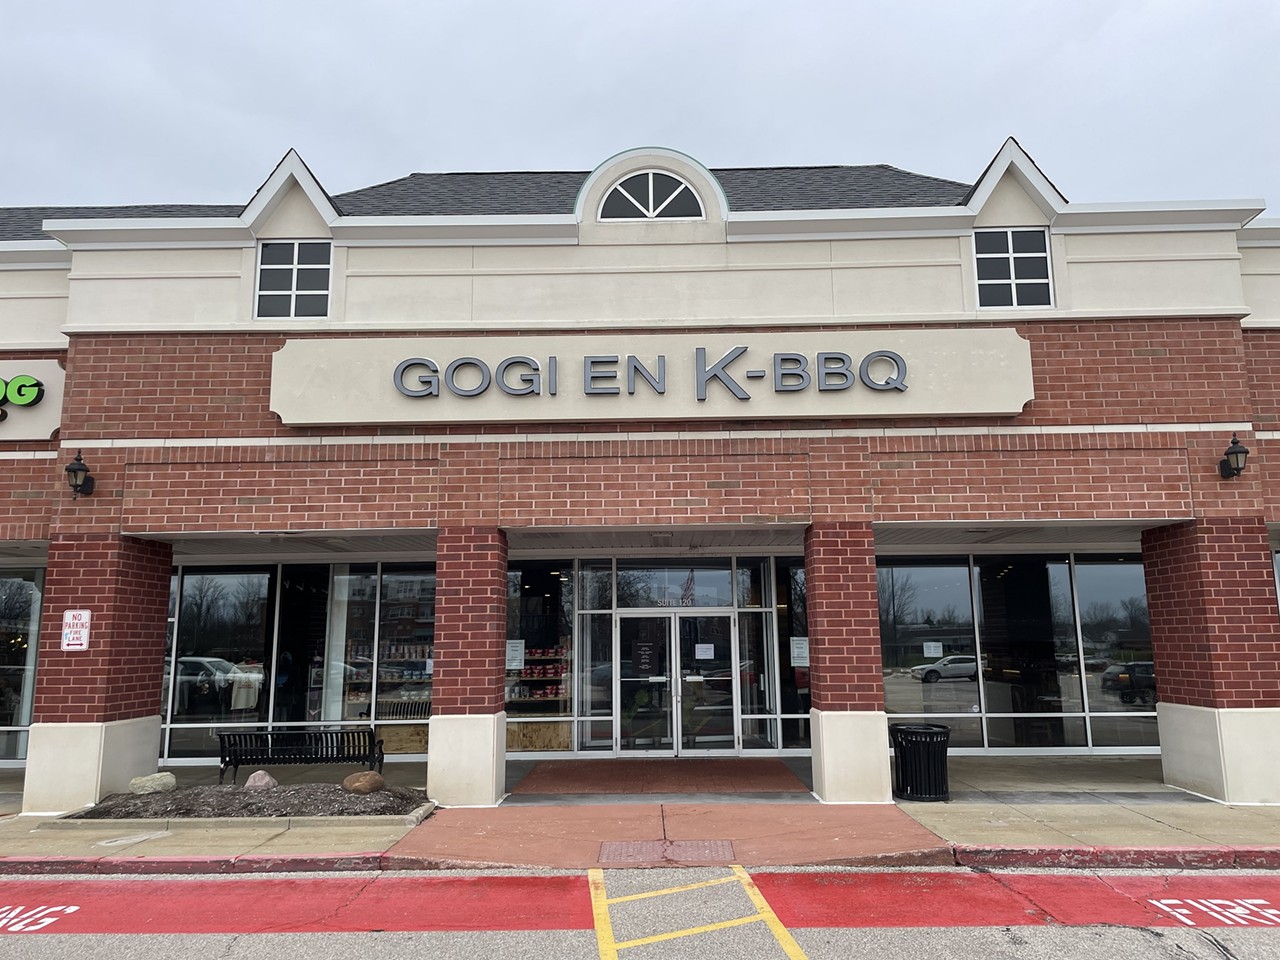 Gogi En
6025 Kruse Dr., Solon
Last summer, the team behind Sushi En restaurants in Cleveland, Columbus and Twinsburg took over the Solon property long home to Akira Sushi and Hibachi. The former hibachi restaurant was the ideal starting point for their next project — a Korean BBQ concept — because of the existing hood systems installed throughout the dining room. The menu offers a pretty typical lineup of meats bound for the grills. There's galbi (marinated beef short rib), bulgogi (marinated ribeye), spicy pork bulgogi and marinated pork rib. An a la carte section of the menu lets diners select from more than a dozen beef, pork, poultry and seafood items ranging from thin-sliced pork belly to marinated shrimp. A handful of combos merge three different proteins. Gogi En also offers a lengthy and creative assortment of gimbap, the Korean rice rolls that resemble sushi rolls but without the raw fish.